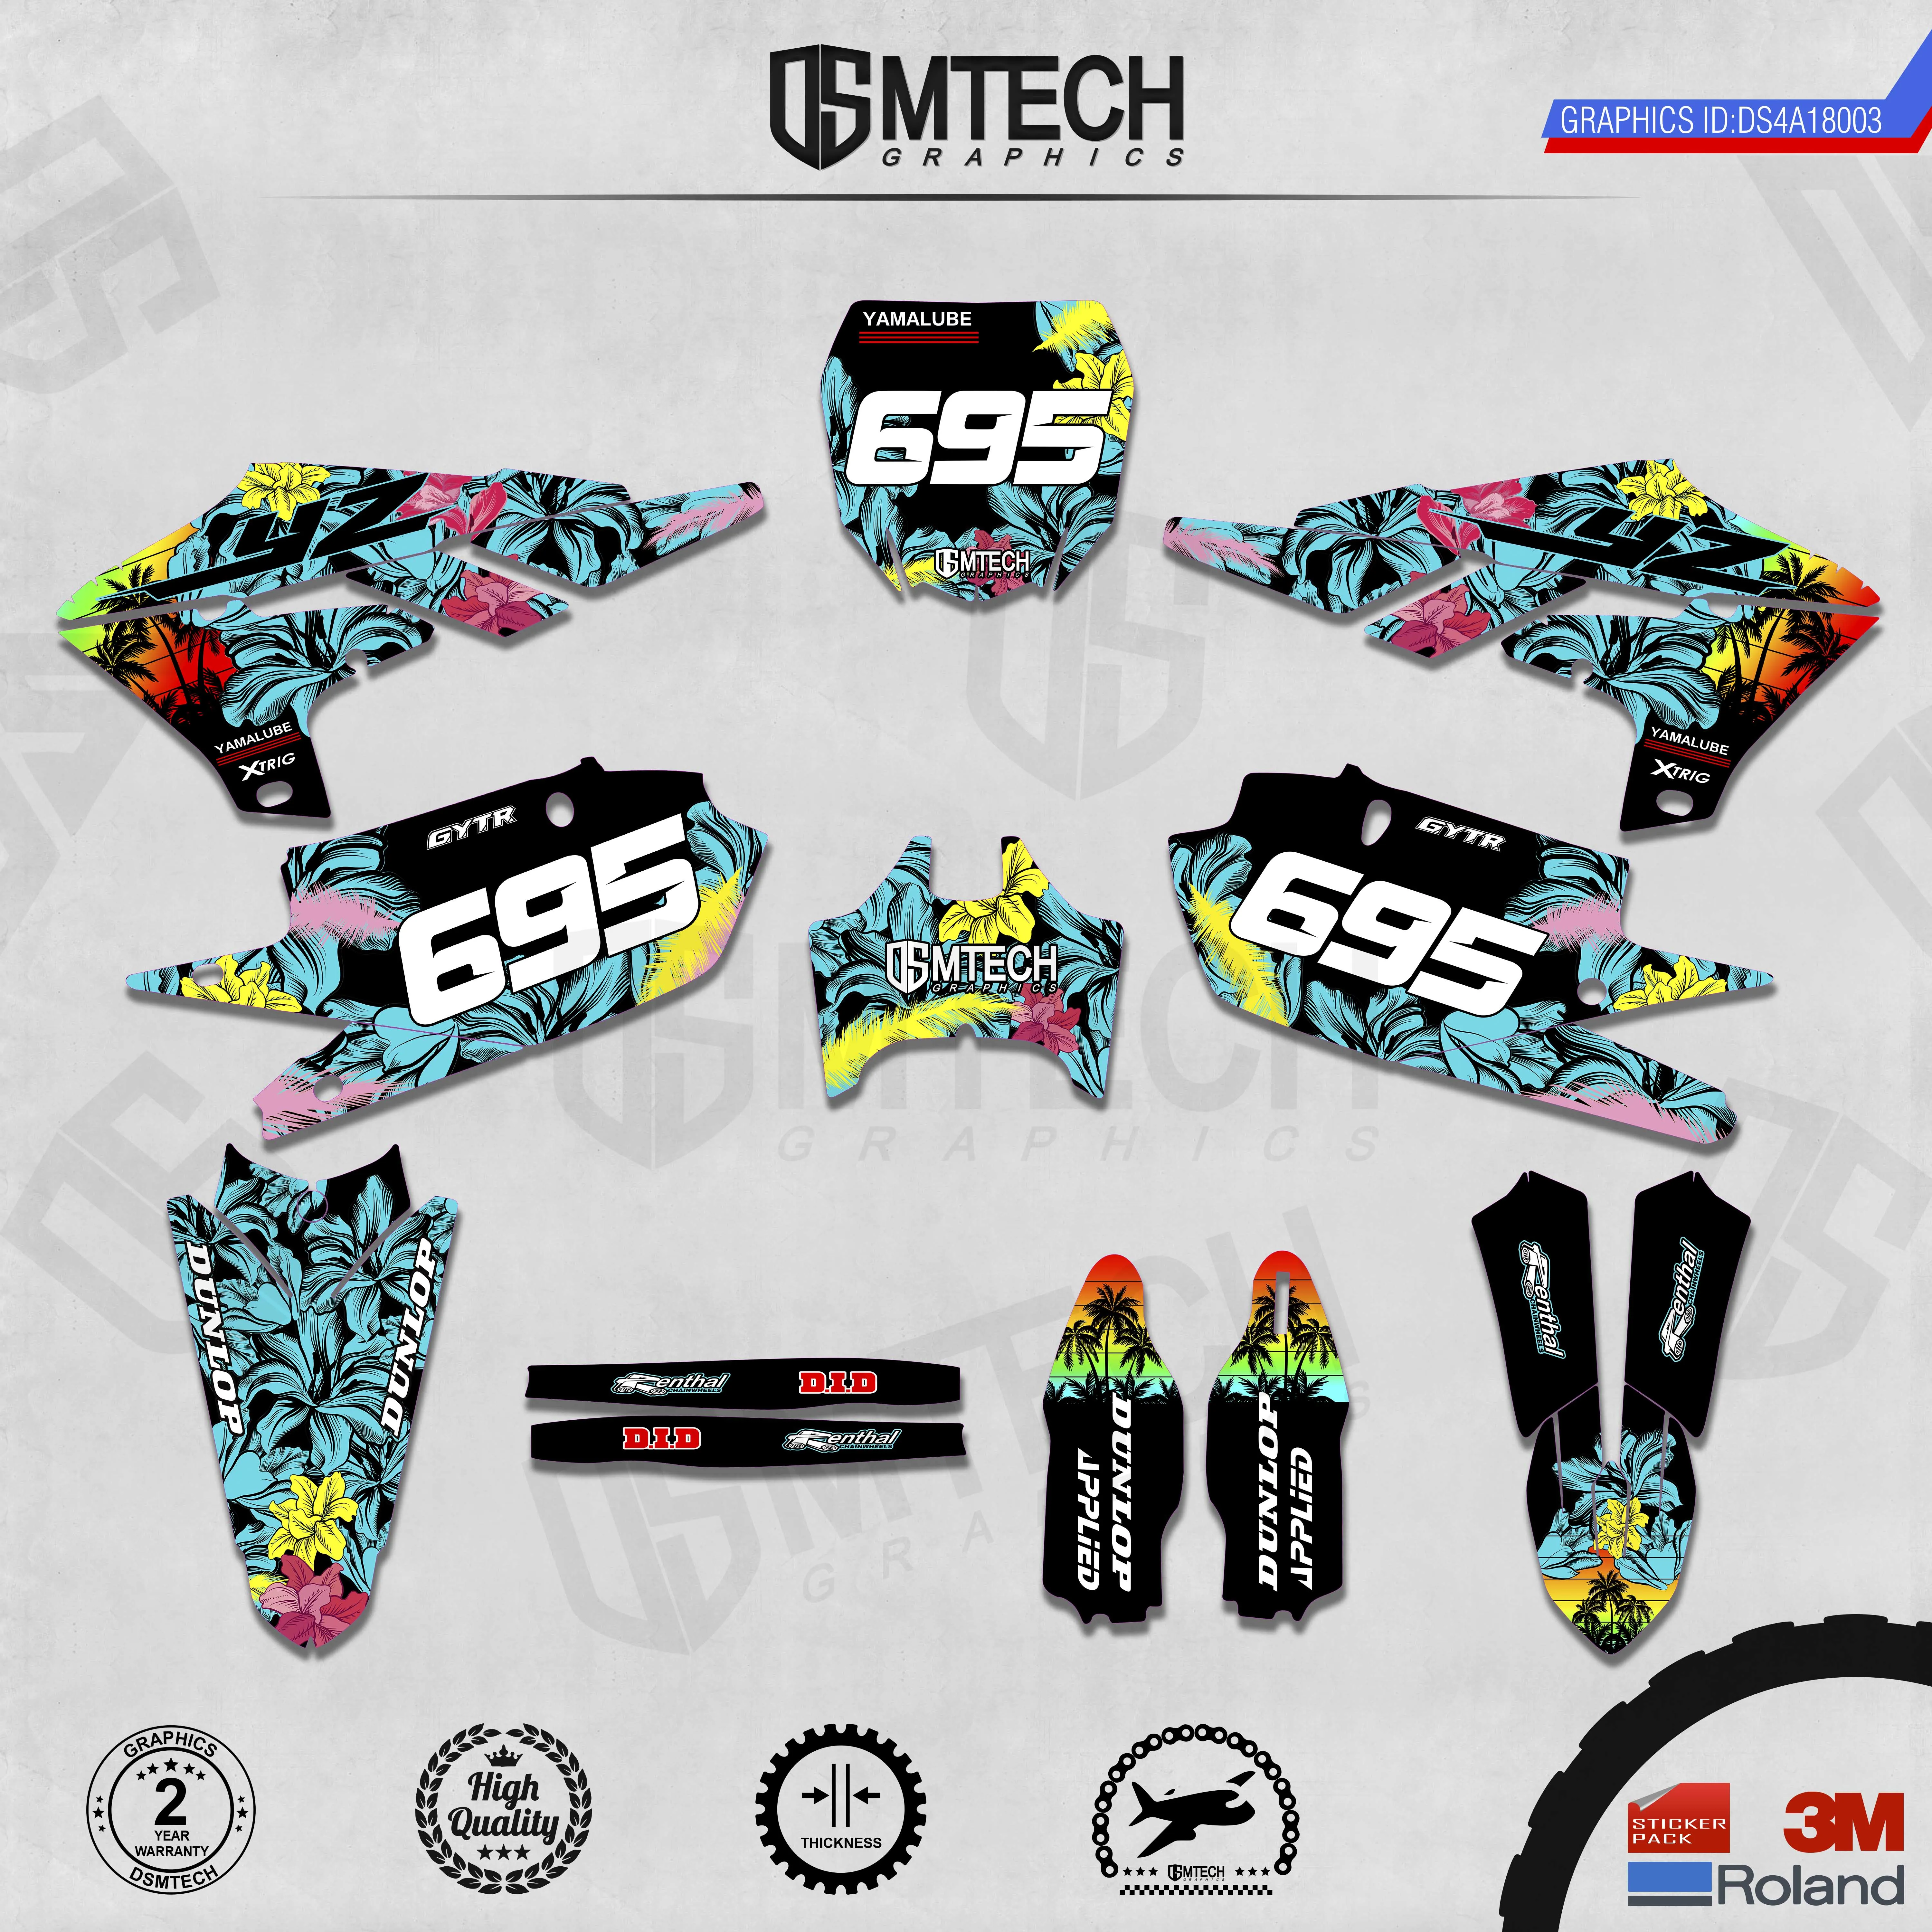 DSMTECH Customized Team Graphics Backgrounds Decals 3M Custom Stickers For 19YZ250F 18-19YZ450F 19-21WR450F Two Stroke   003